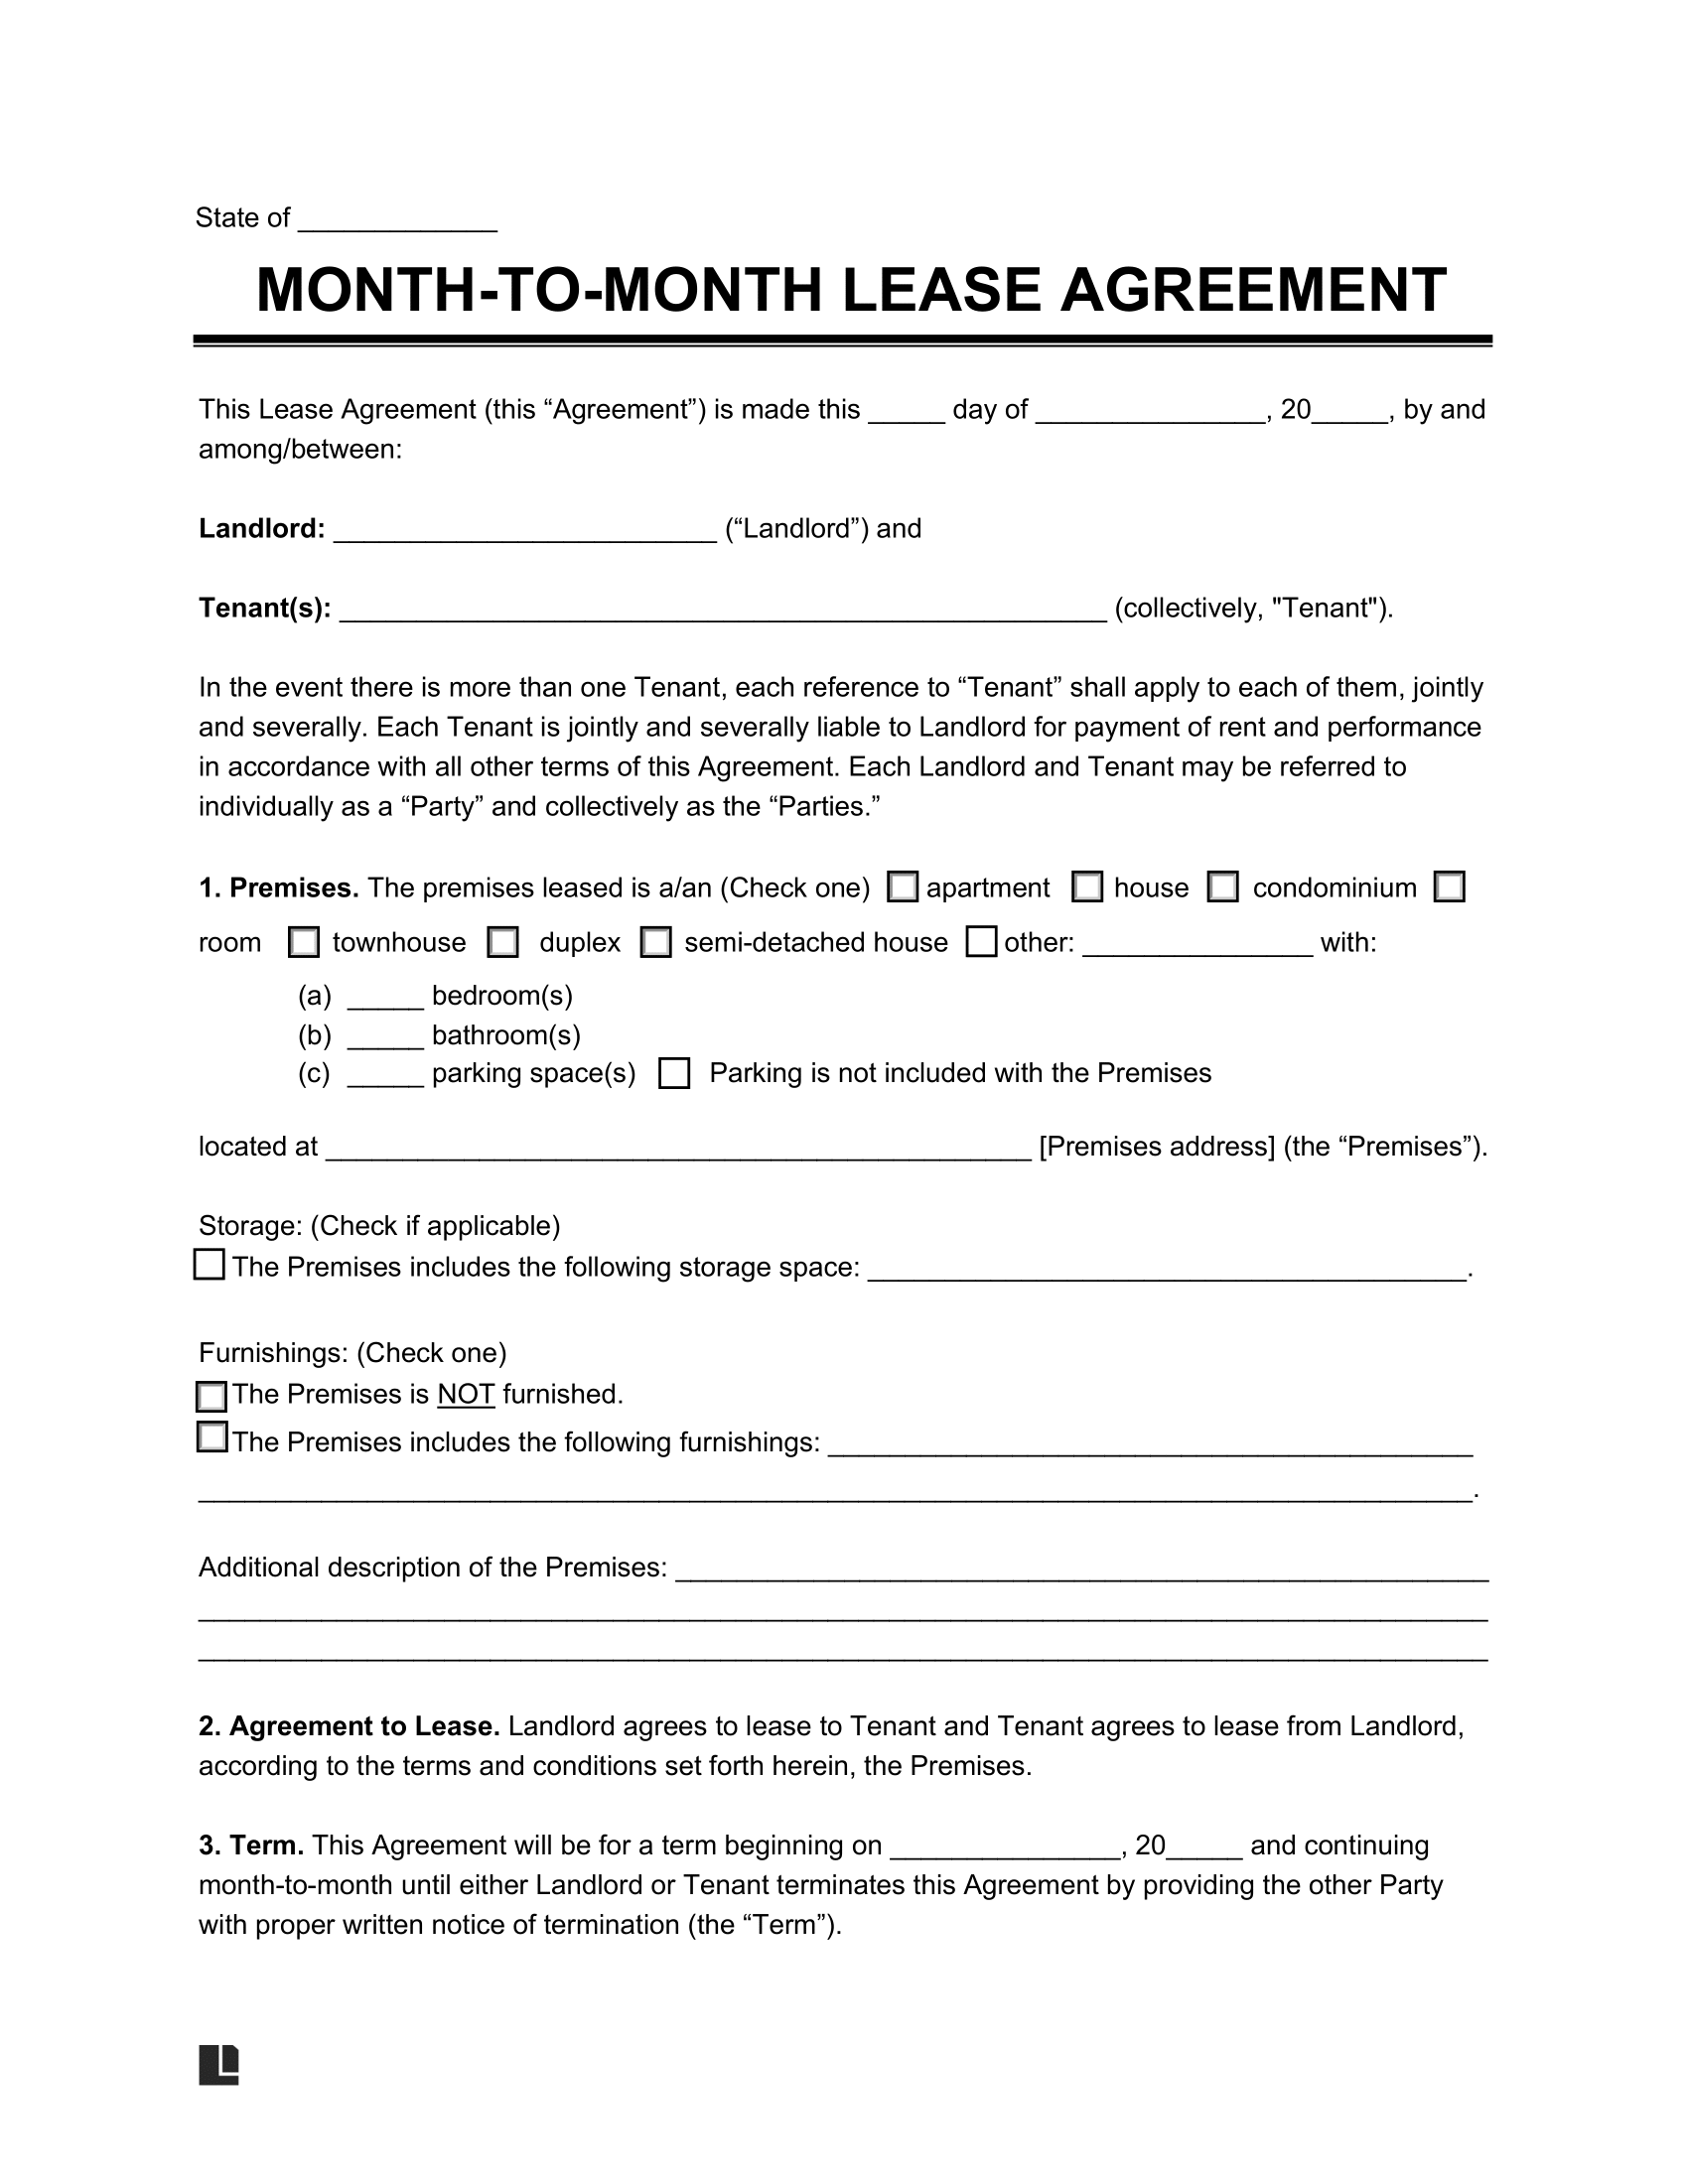 Free Month to Month Rental Agreement Template PDF Word - Blank Lease Agreement Free Printable